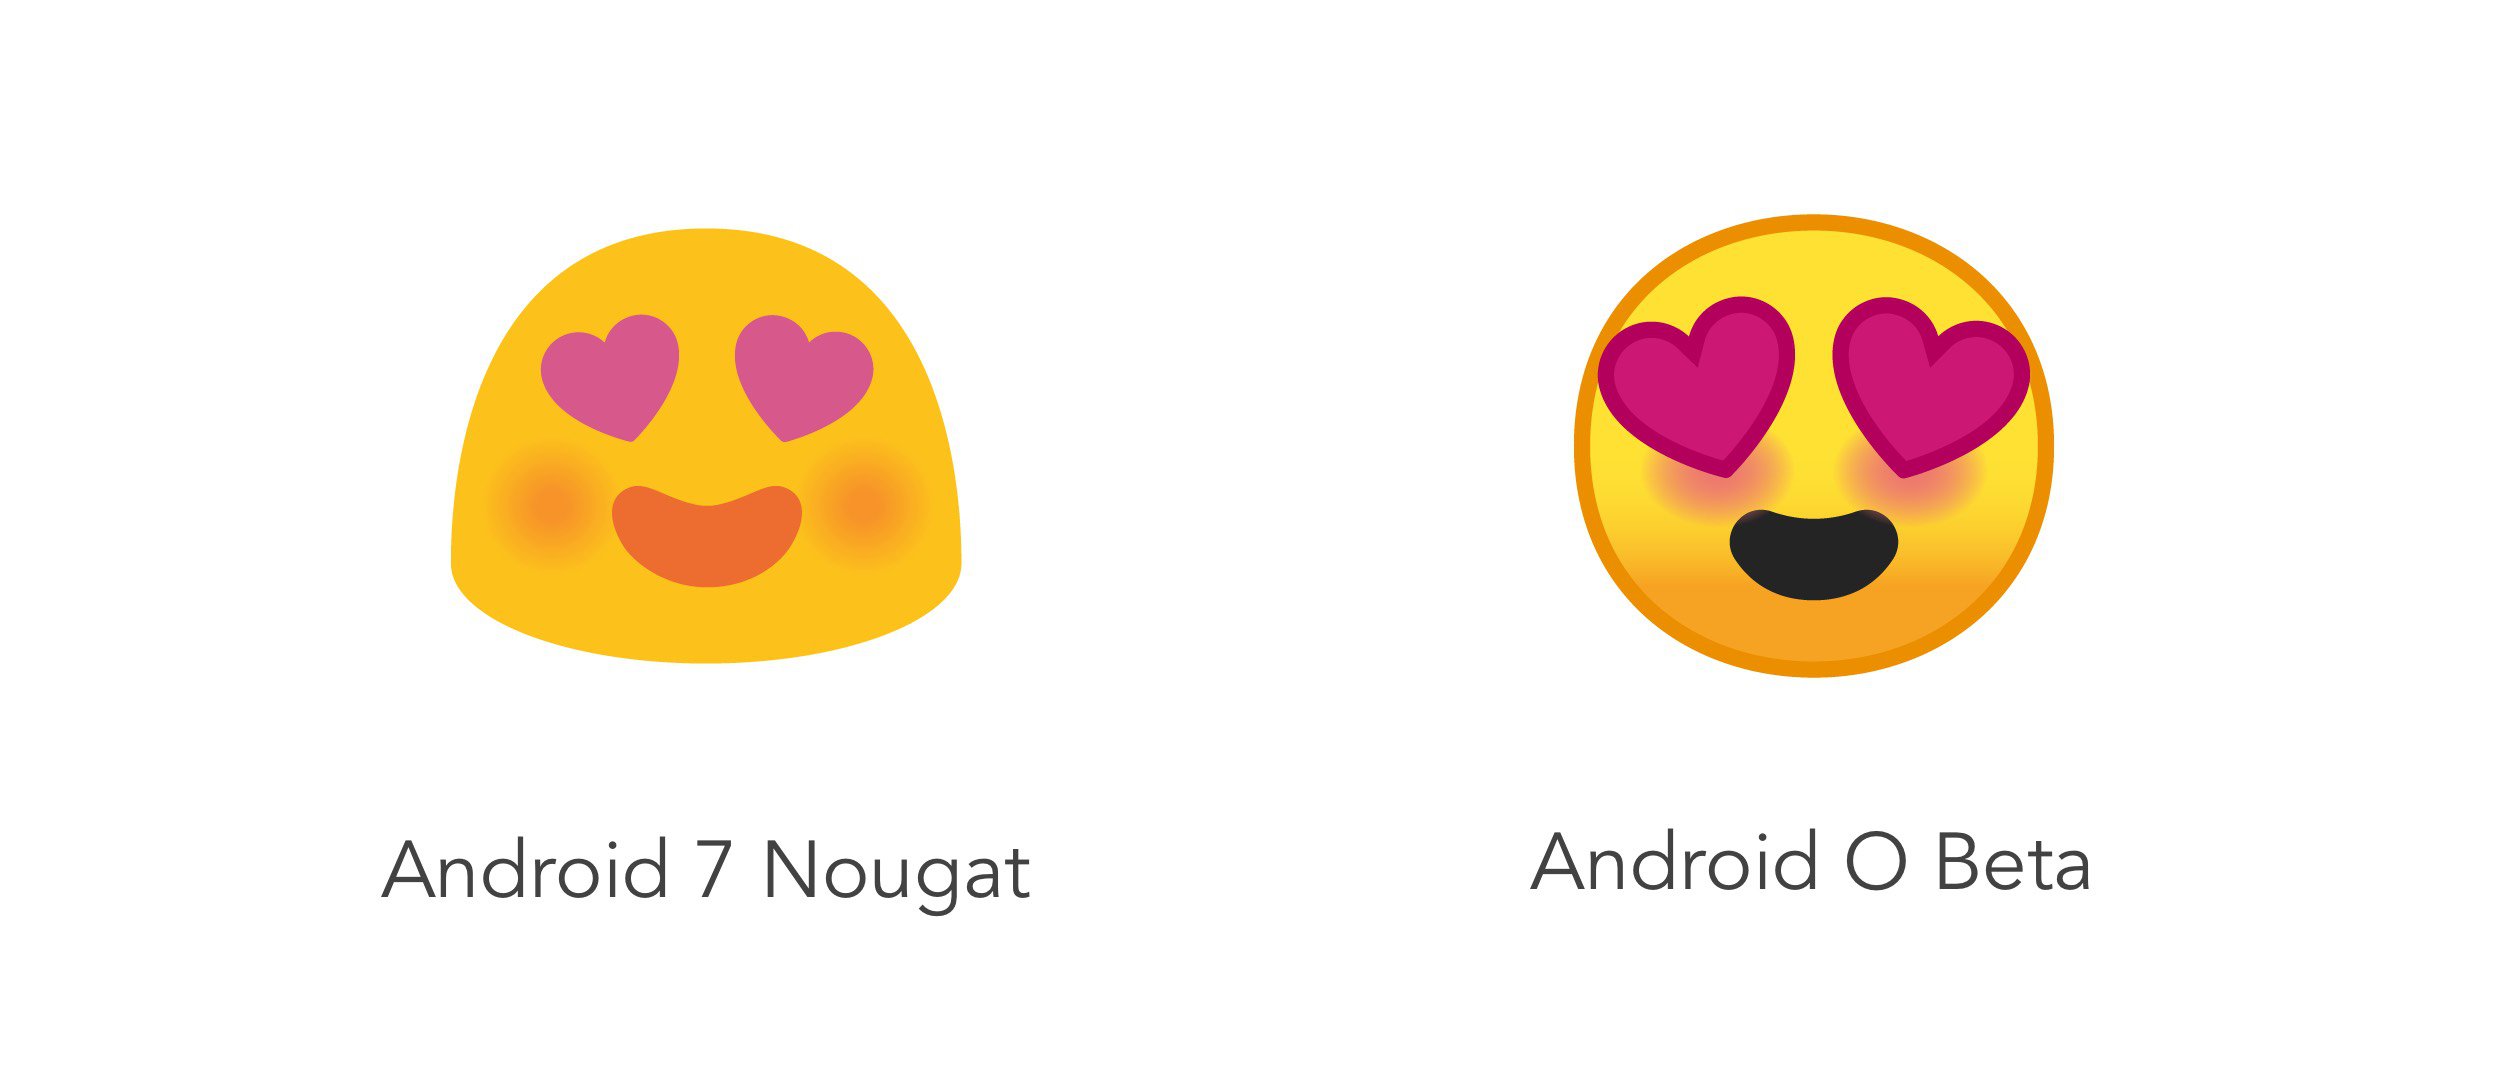 Android Smiling Face With Heart-Shaped Eyes Emoji.